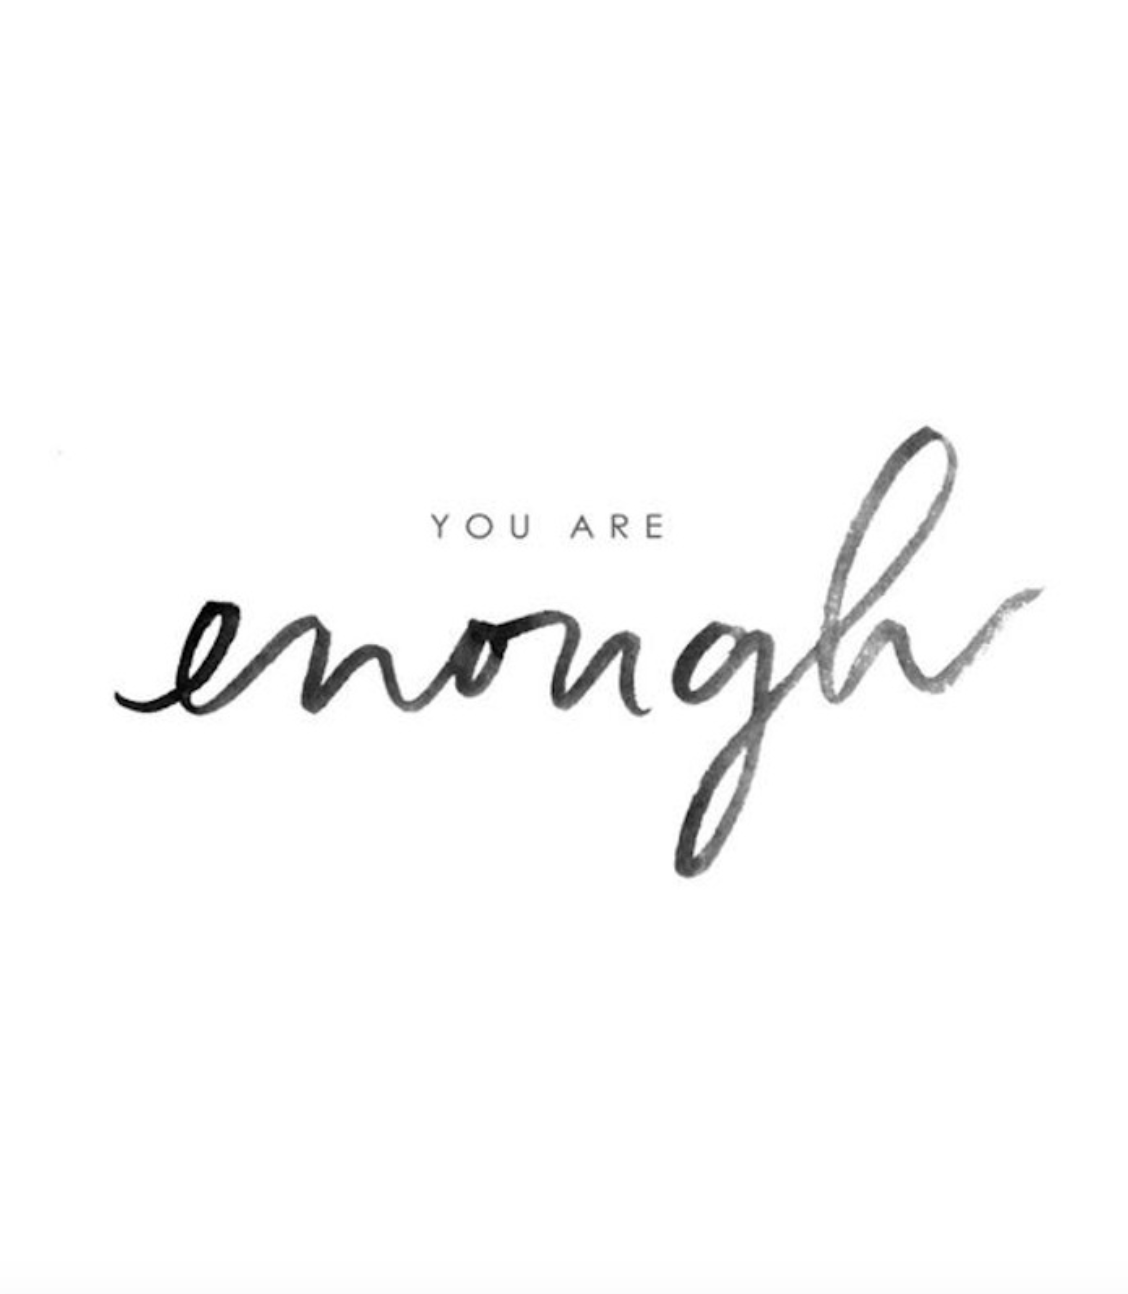 I am enough Decal